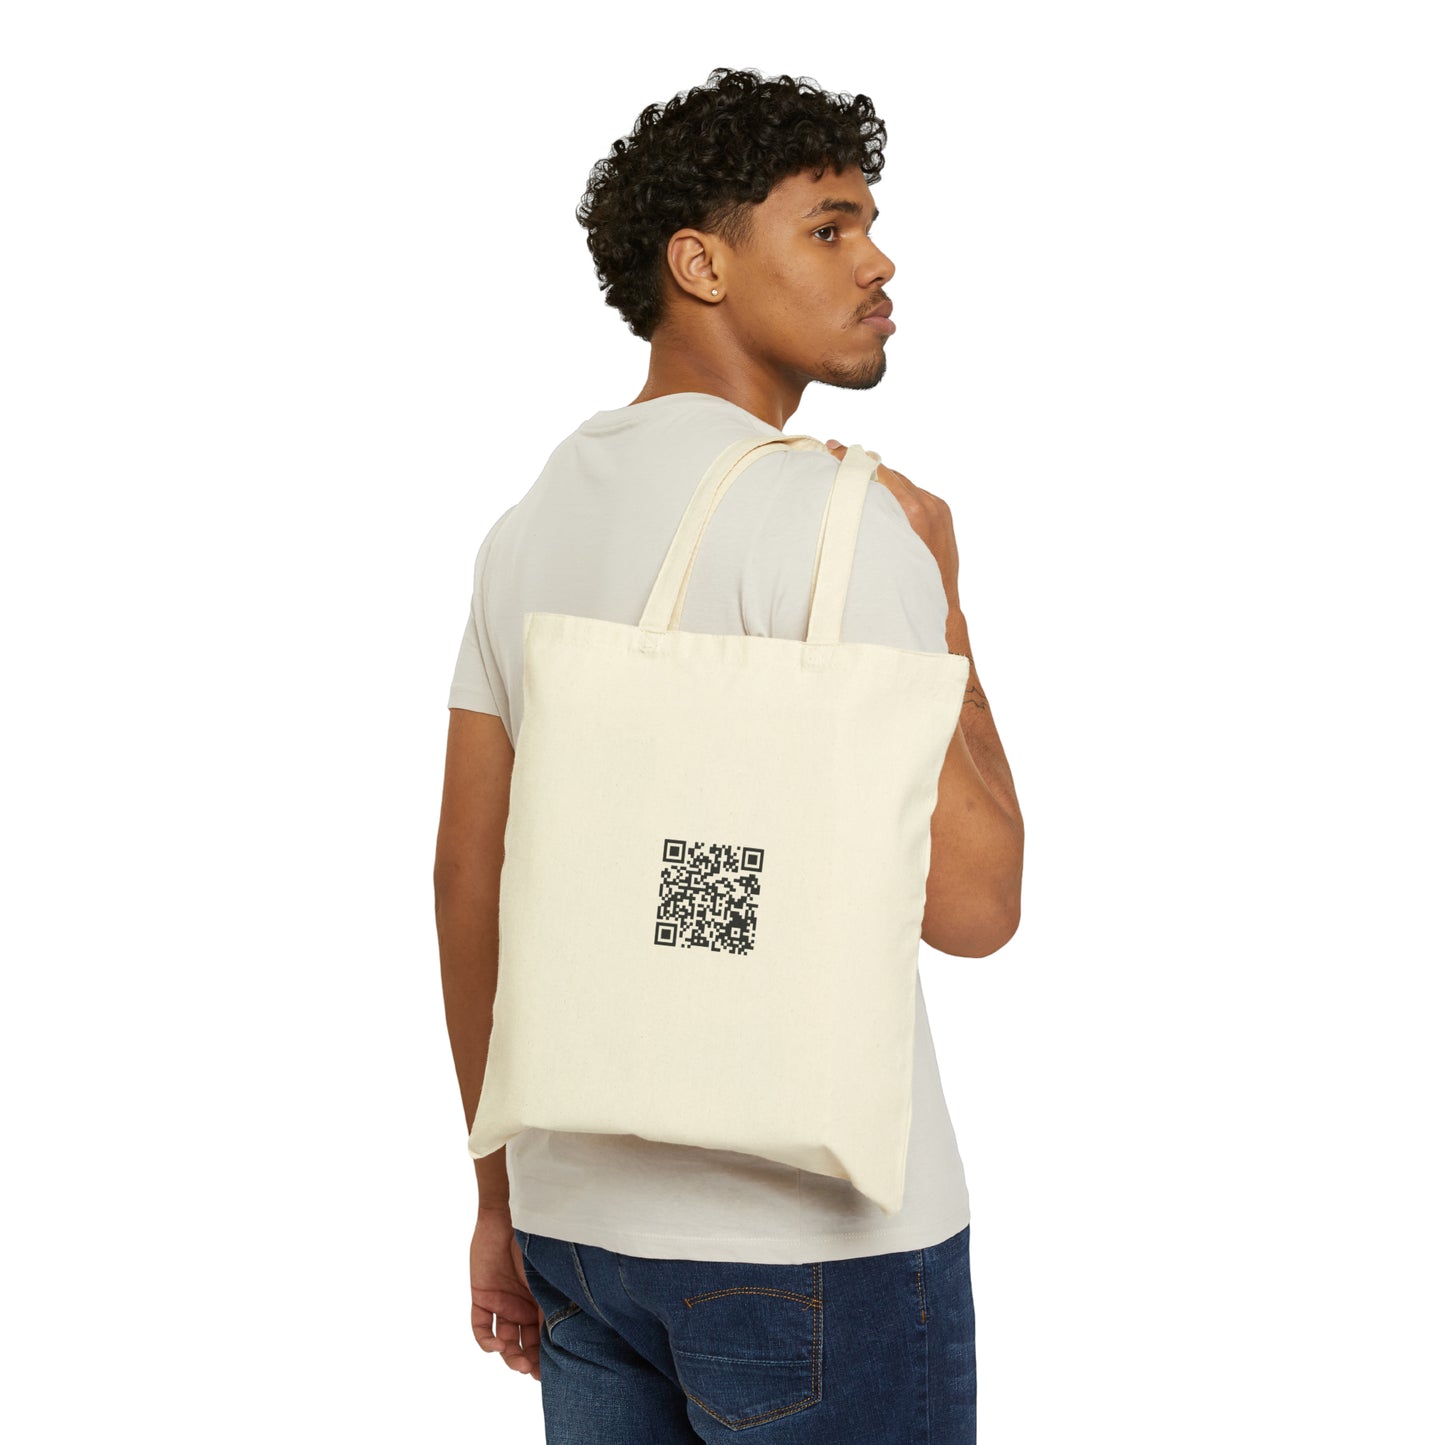 Test Subjects - Cotton Canvas Tote Bag